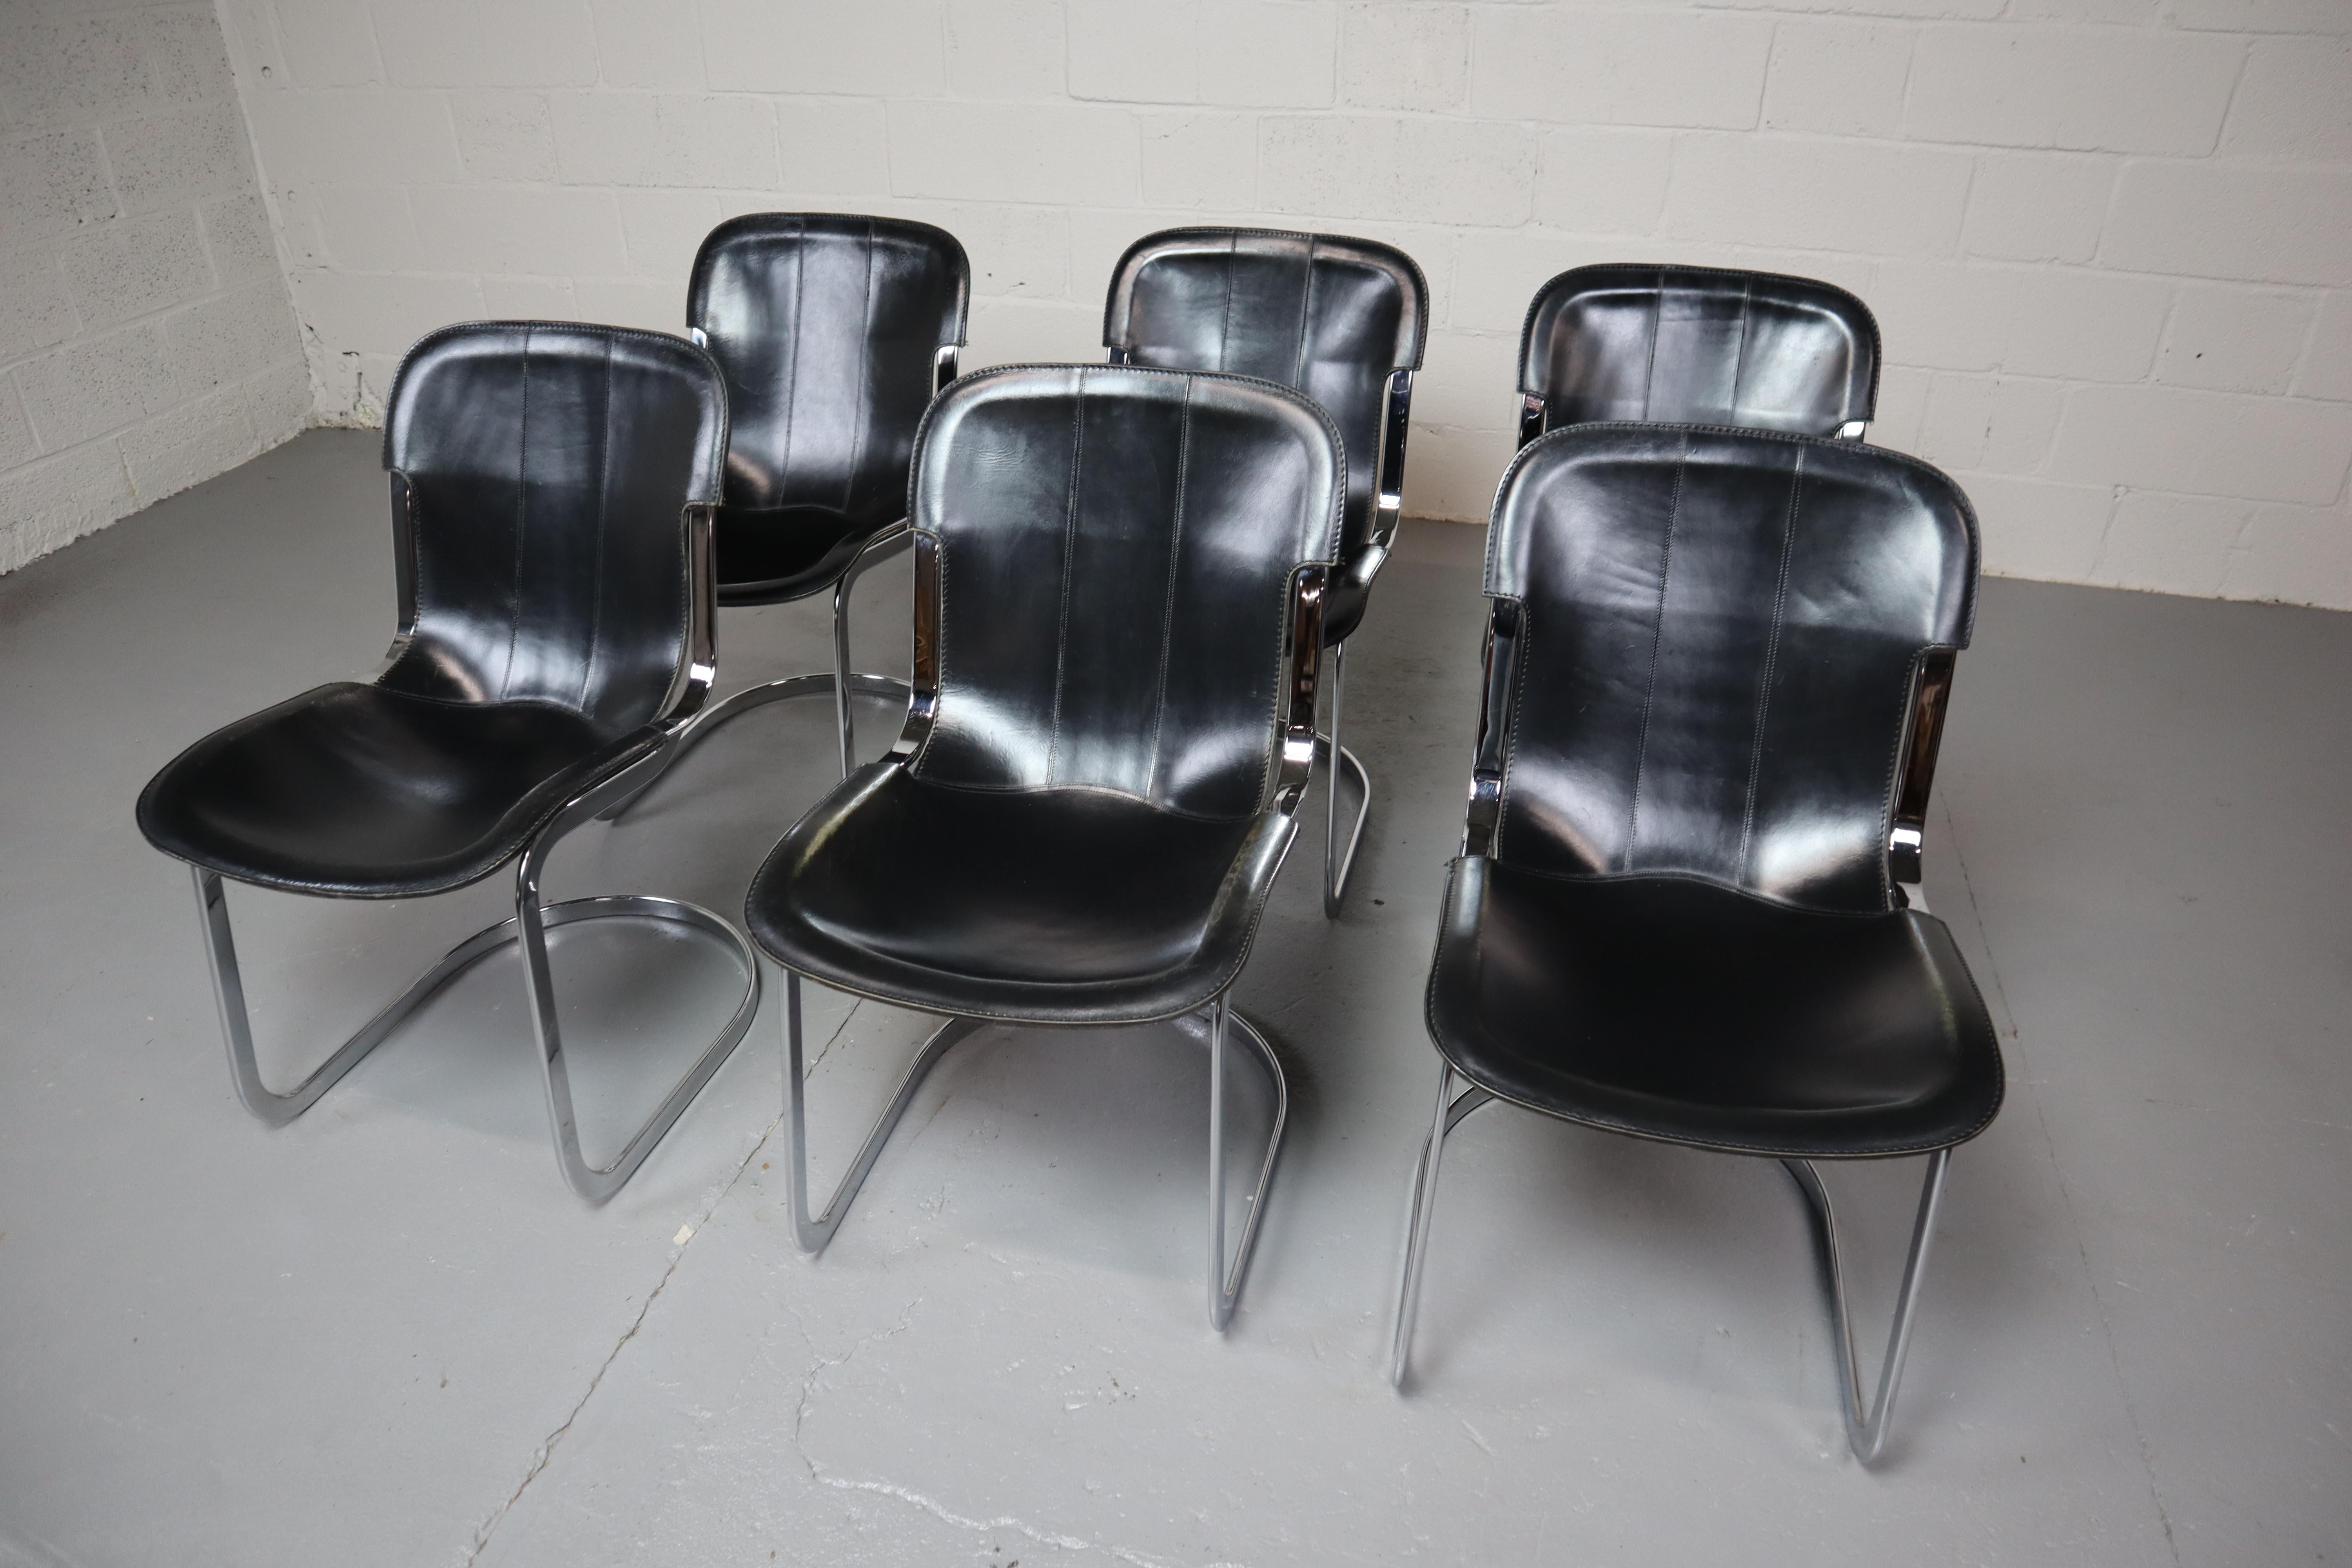 Mid-Century Modern Set of six dining chairs by Willy Rizzo for Cidue, Italy 1970's.